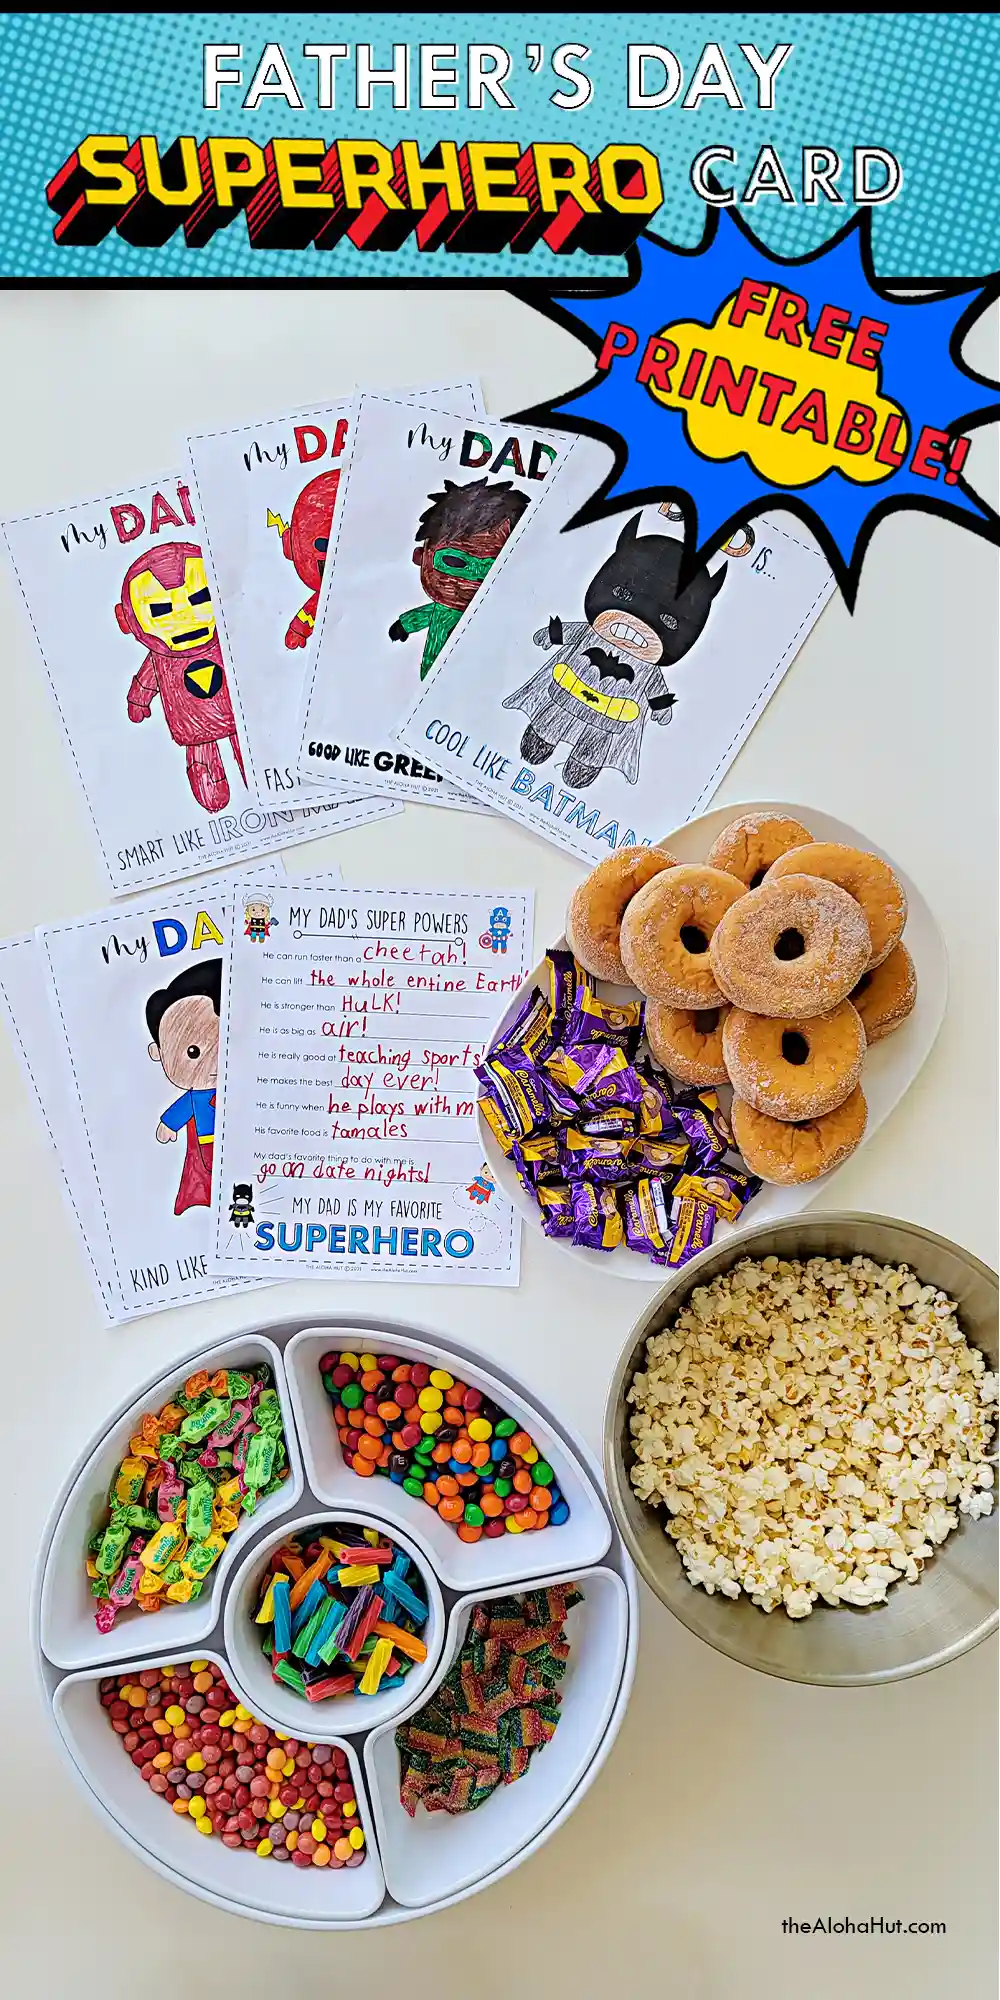 Superhero themed Father's Day gift ideas that are inexpensive. Includes superhero coloring pages, an All About Dad questionnaire and page, plus a superhero poster for dad. Print the Father's Day superhero gift bundle and have a fun family movie night with dad watching your favorite superhero movie.